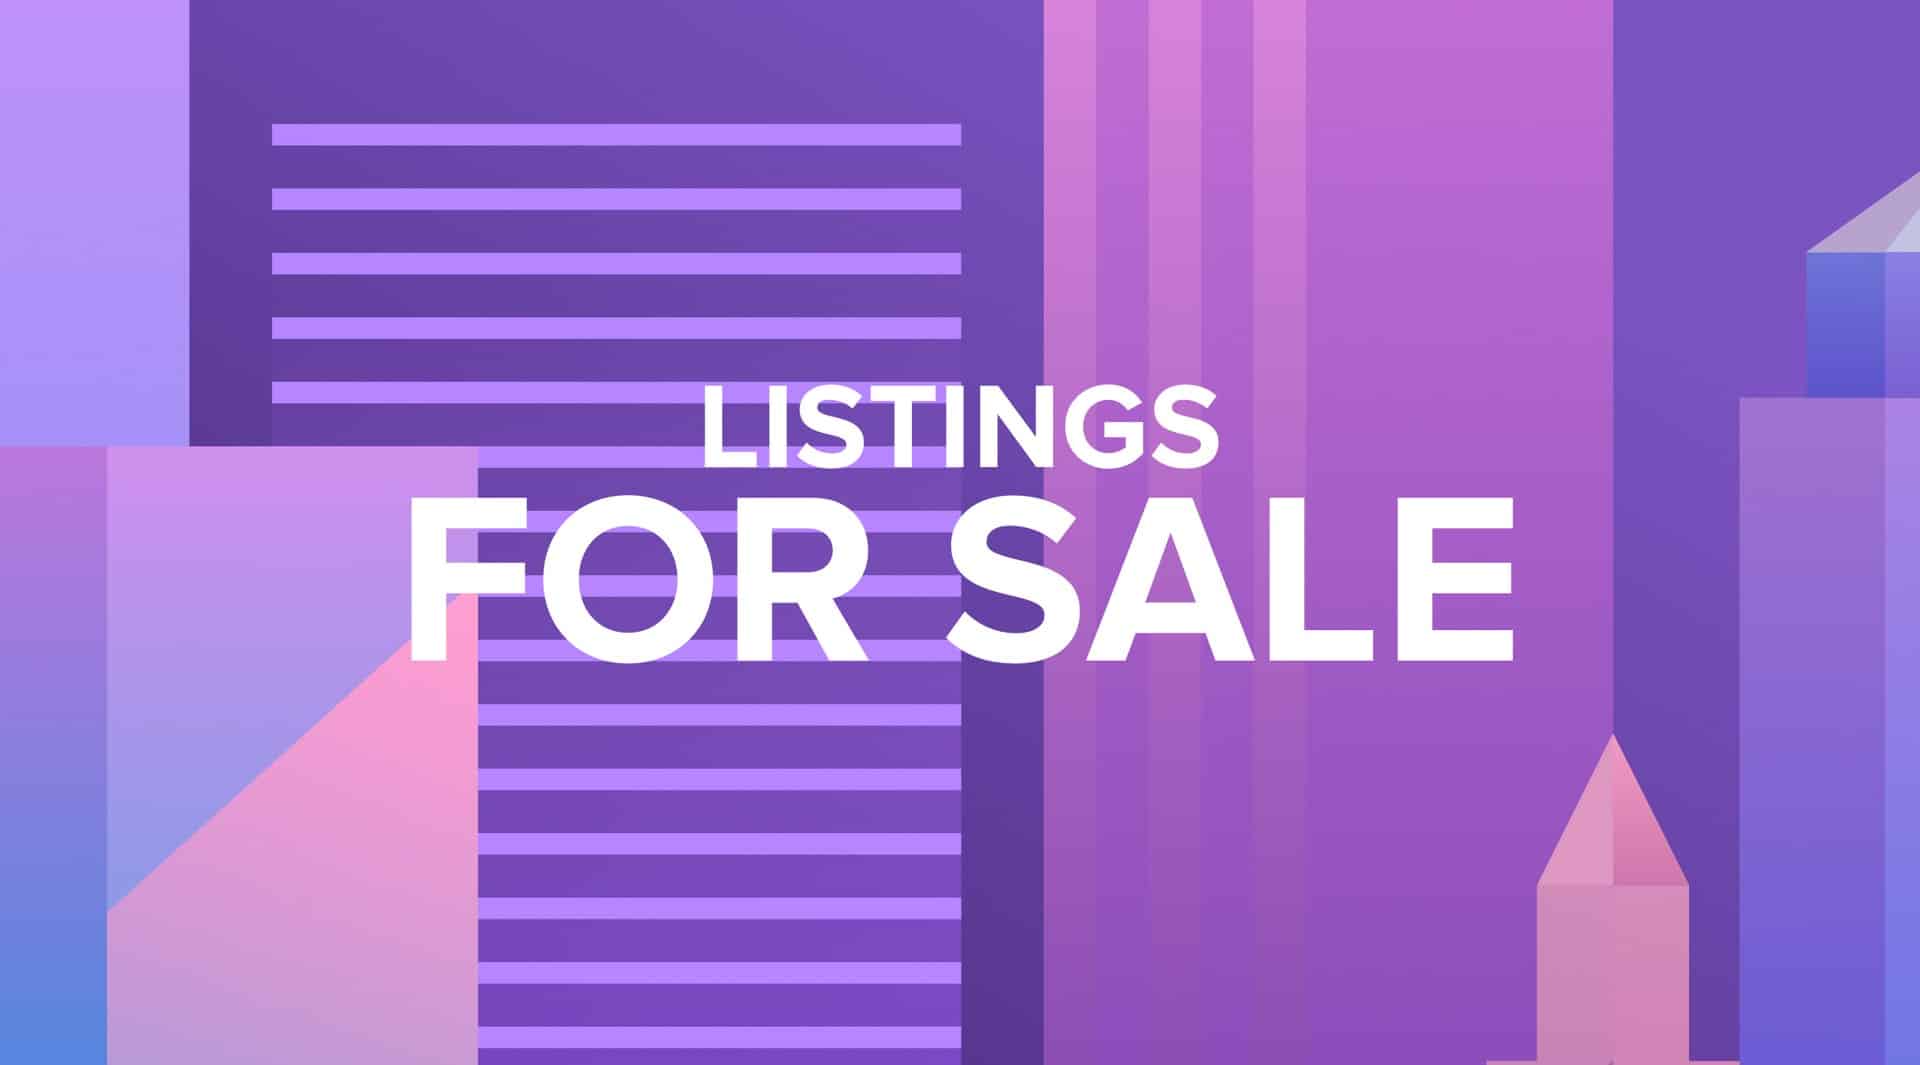 Rentberry offers listings for sale